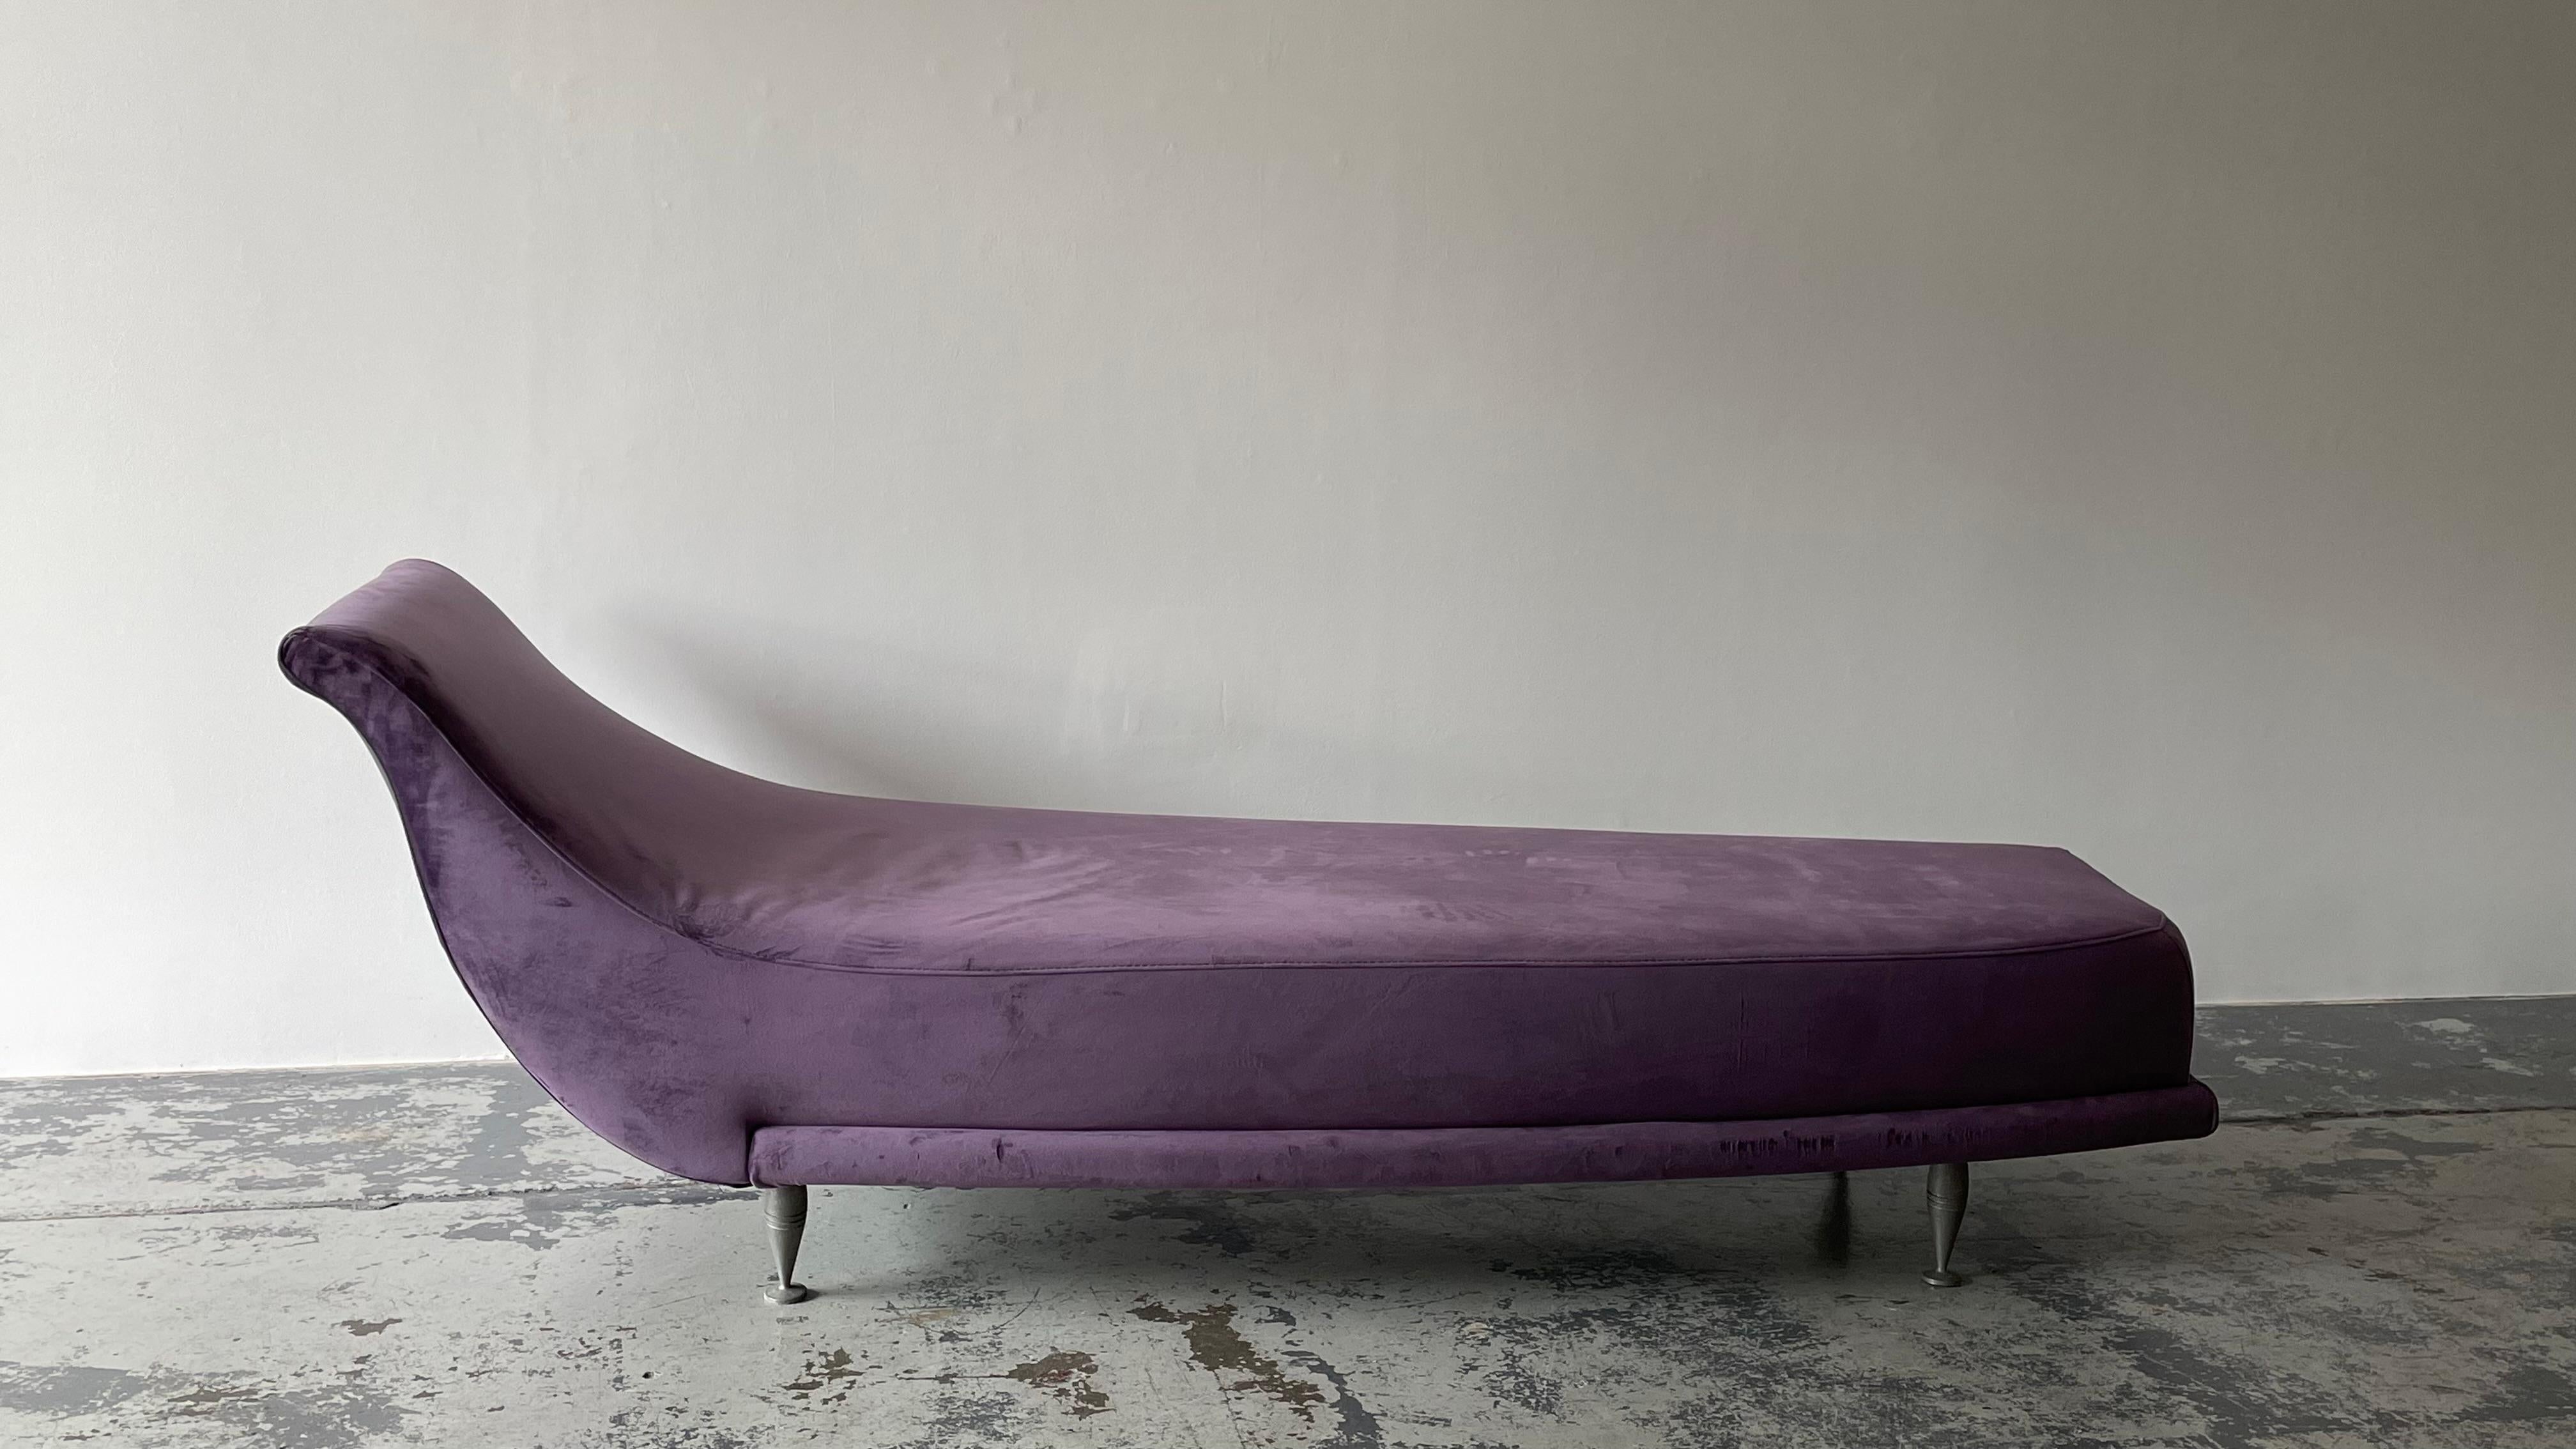 Sculptural and modern, this chaise longue designed by Italian Massimo Iosa Ghini in 1989 for Moroso is called the New-tone. 

Featuring a new upholstery in purple velvet, with feet in satin tone aluminum.